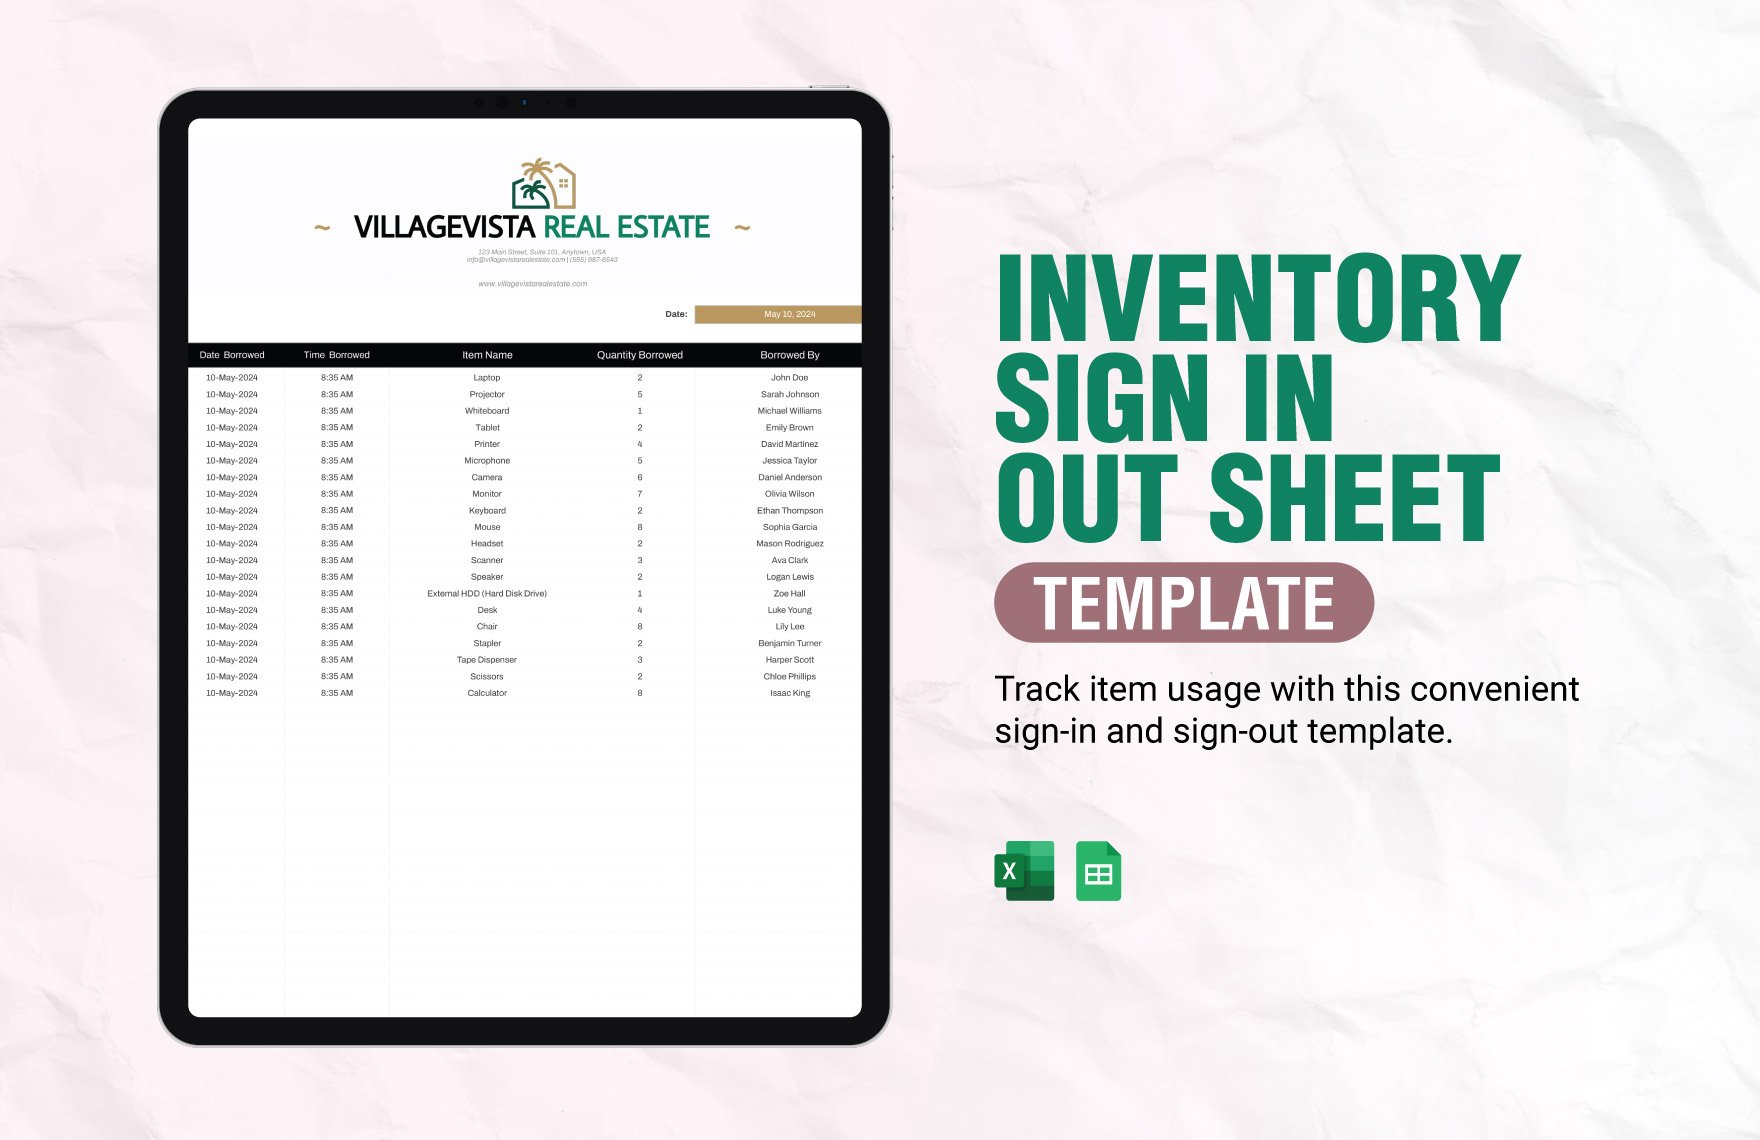 Inventory Sign in Out Sheet Template